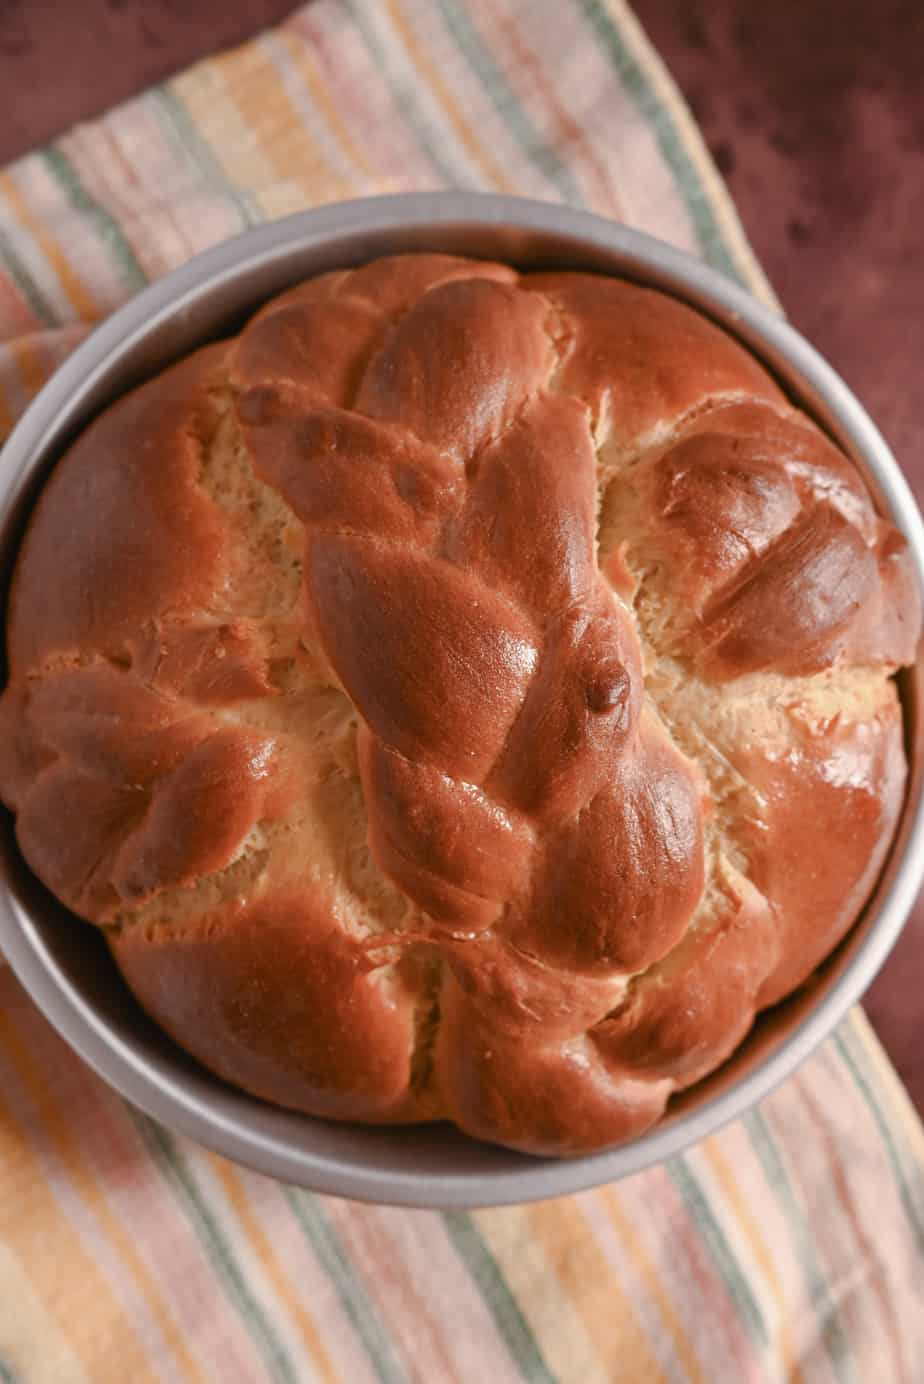 Overhead view of baked Paska loaf, decorated with crossed braids